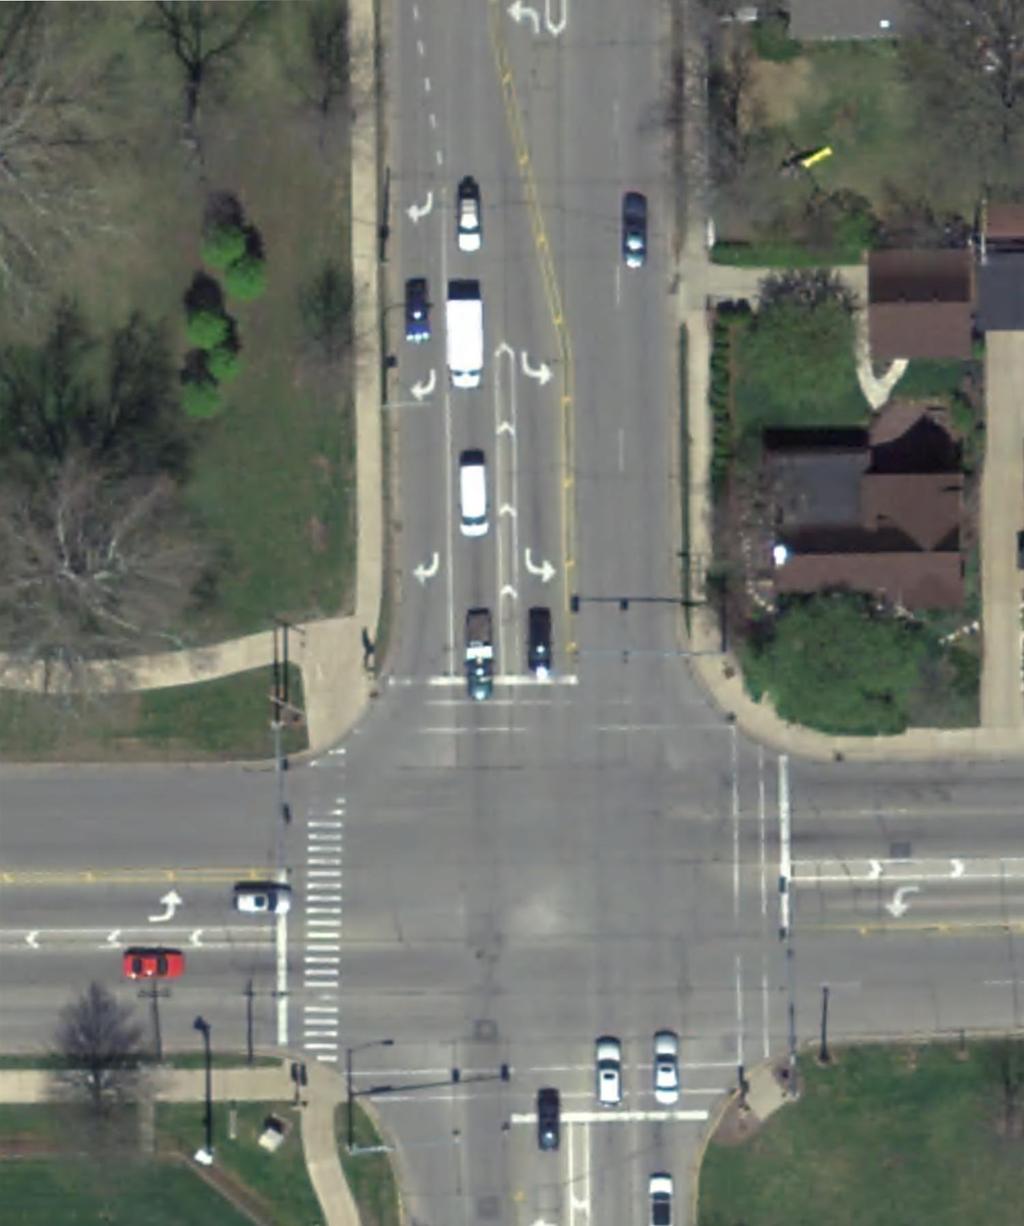 Replace existing standard crosswalks with continental style crosswalks Remove existing 6' and replace with 10' sidepath Remove existing 6' and replace with 10' sidepath otes: : One signpost with two